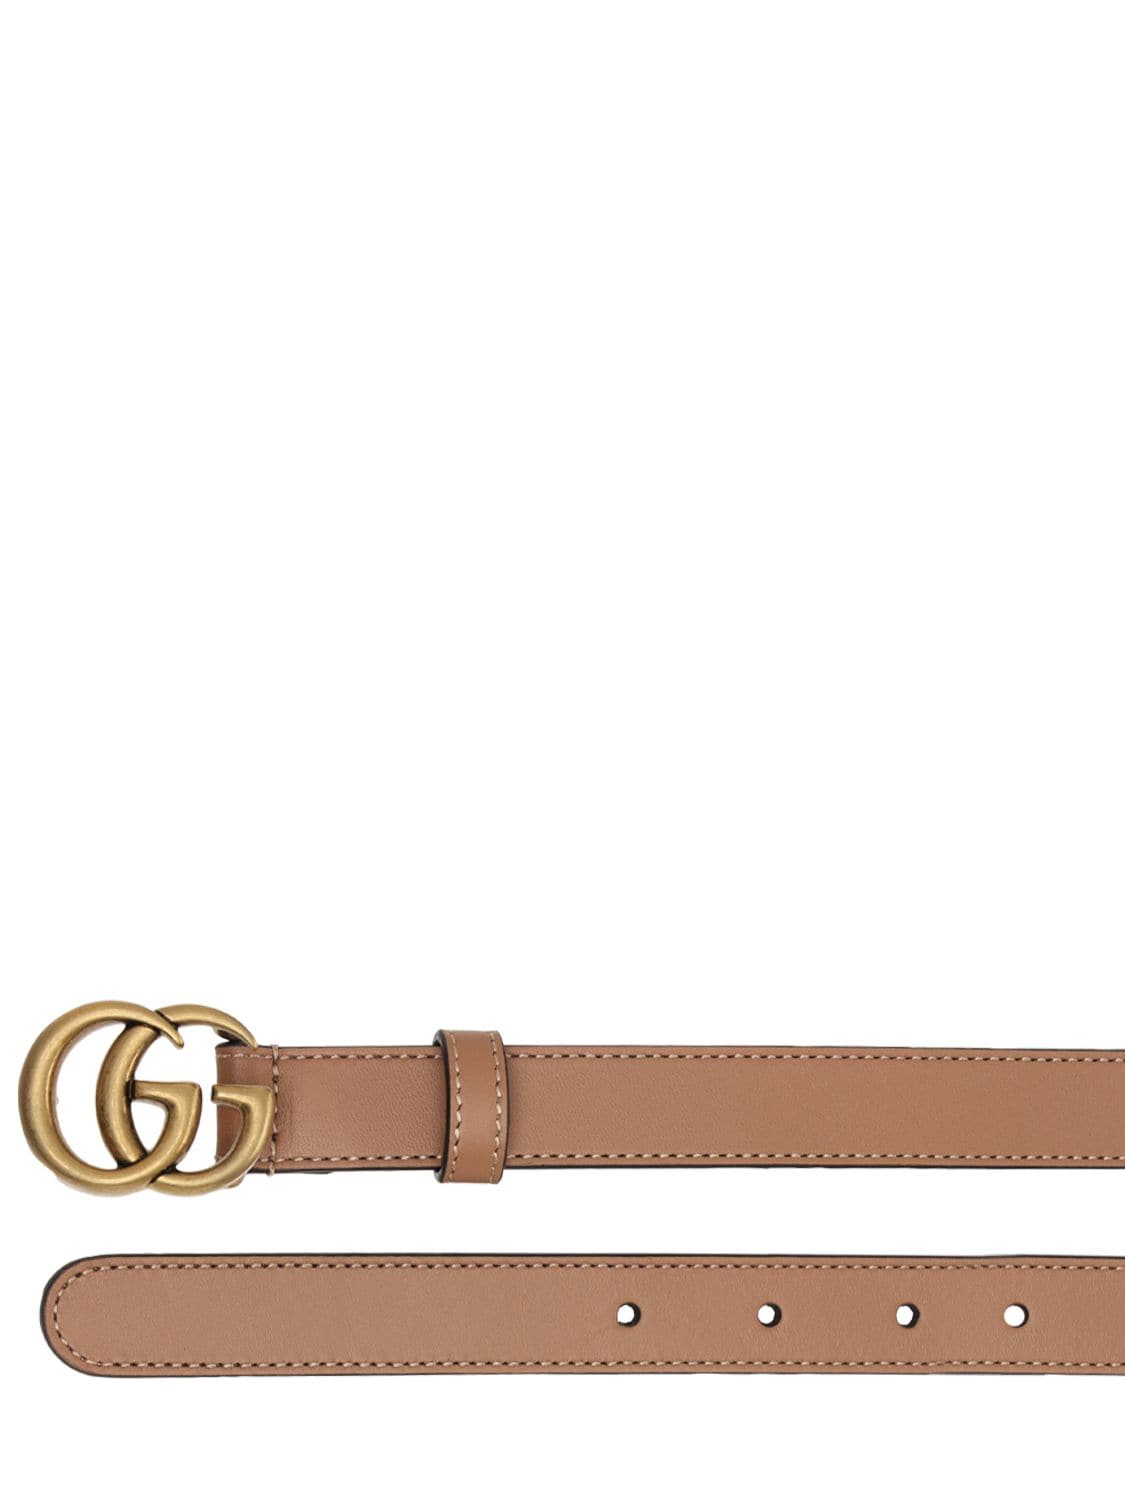 Shop Gucci 2cm Gg Marmont Leather Belt In Natural Tan